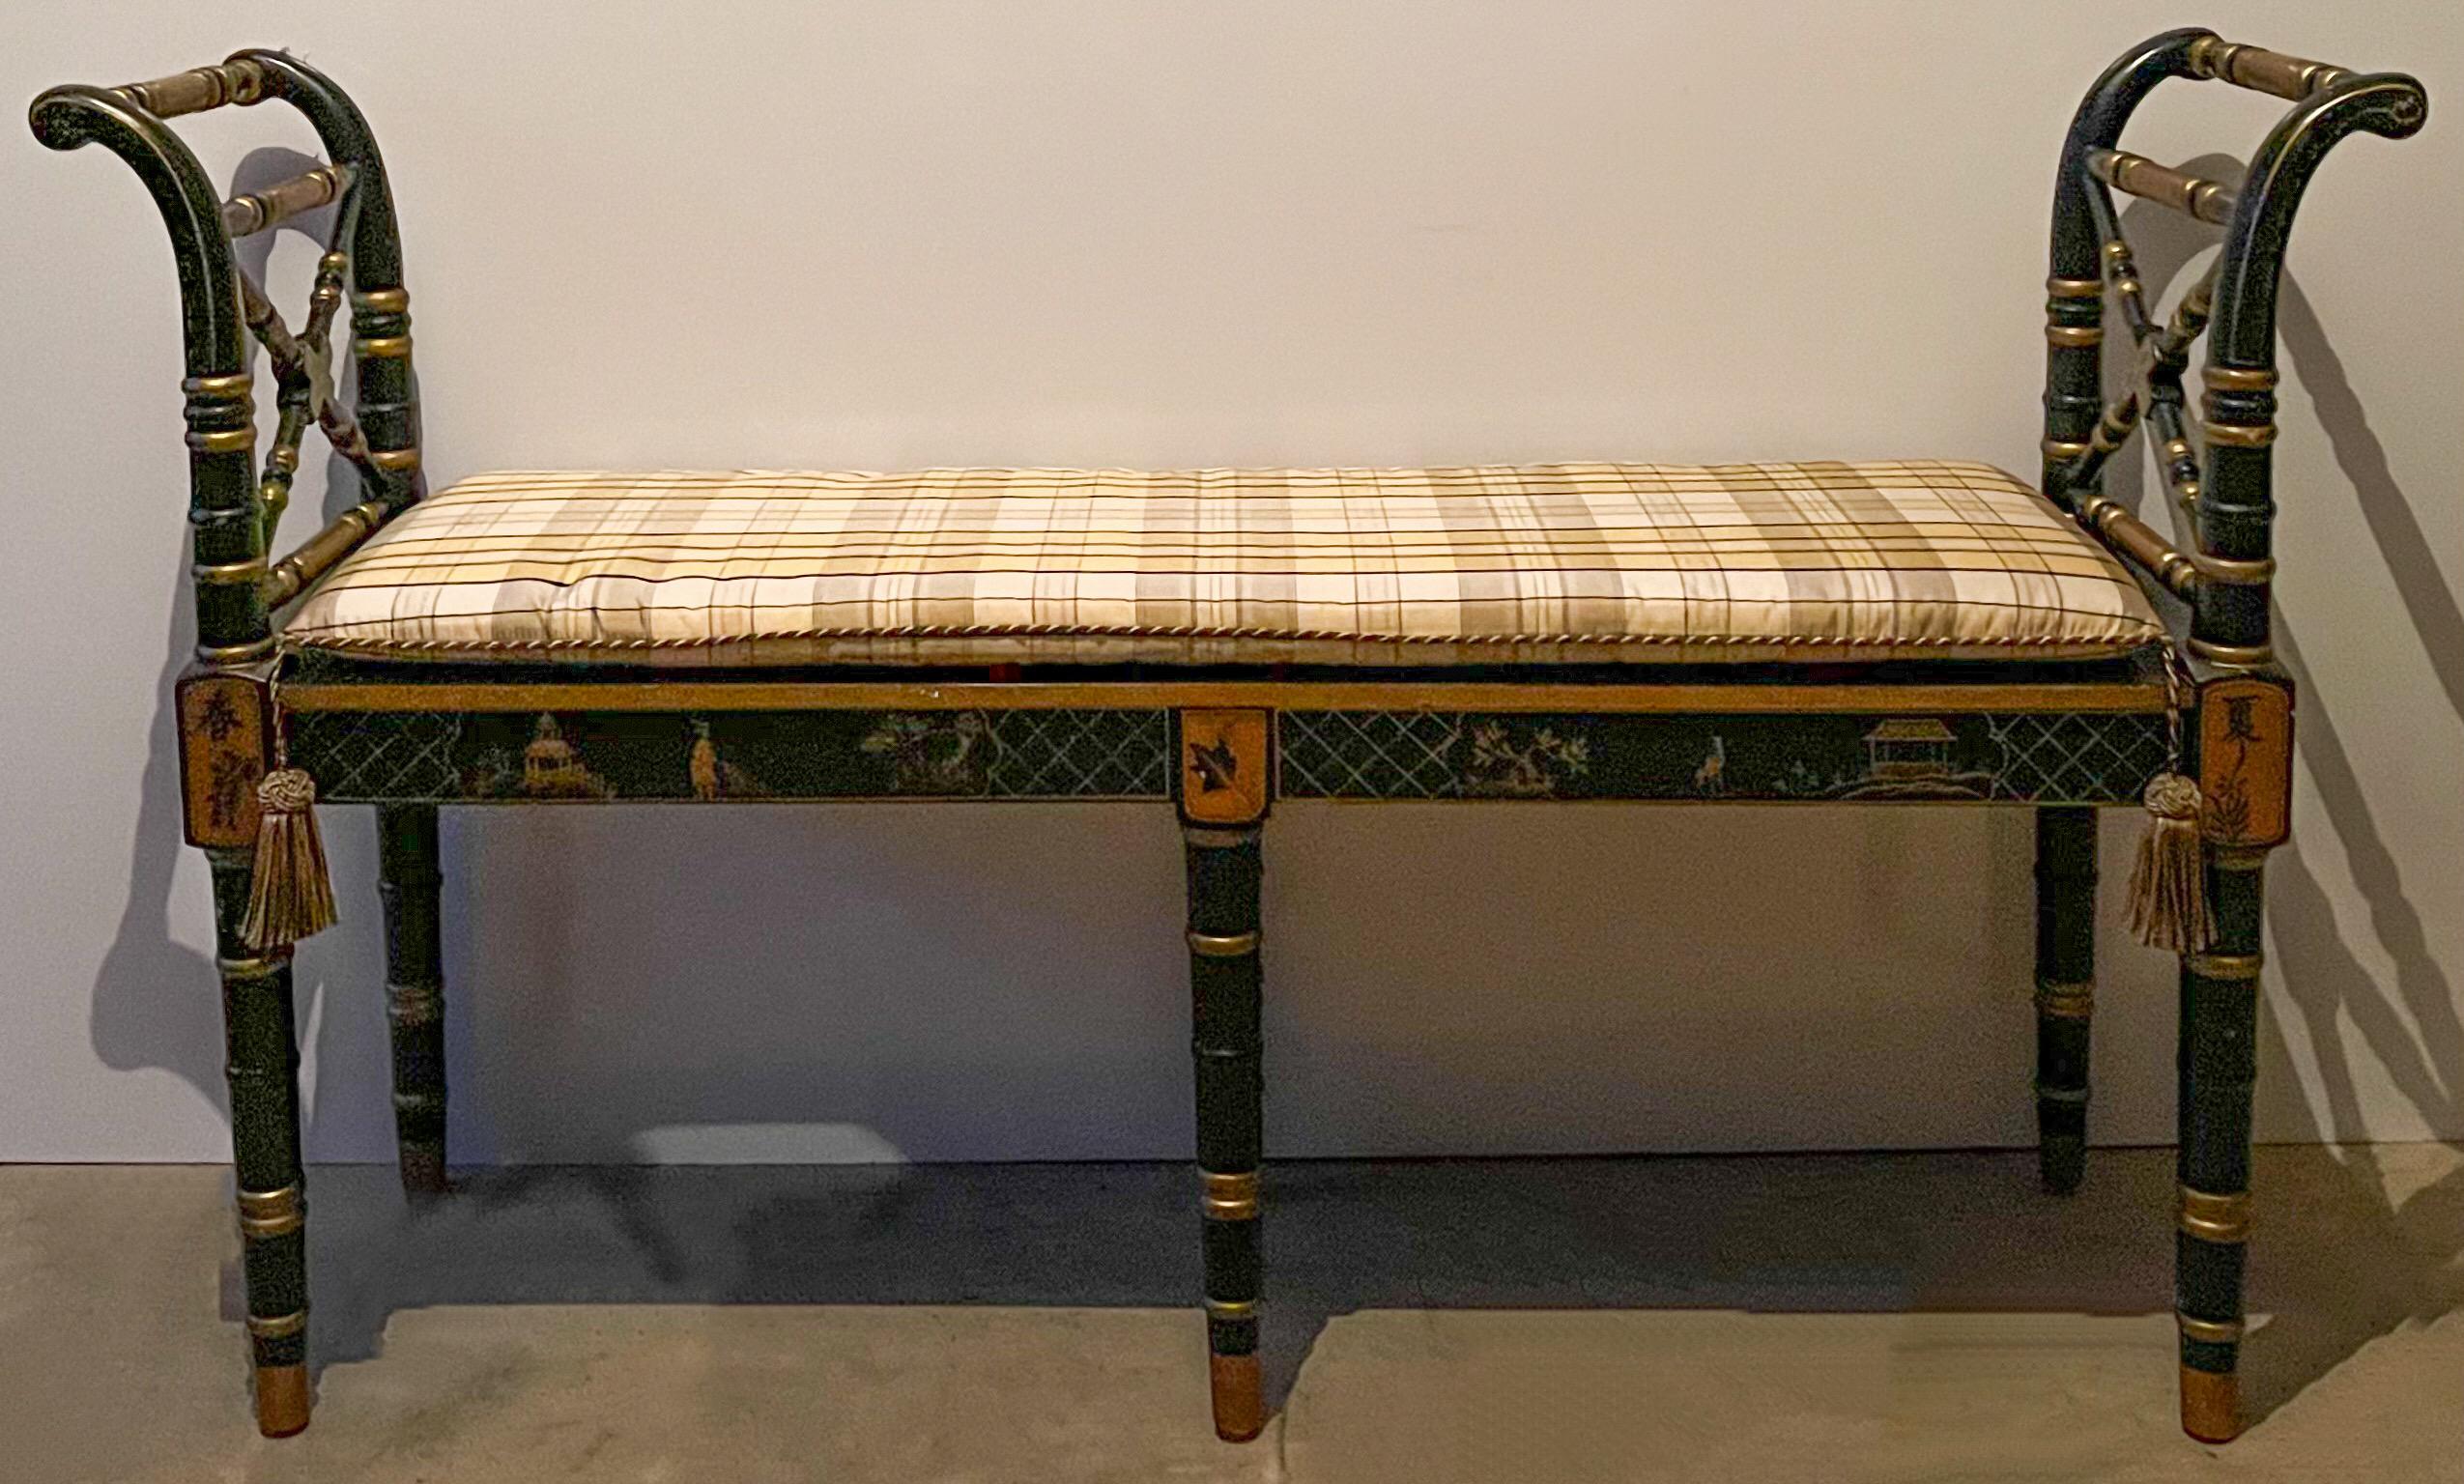 This is a 20th century regency style chinoiserie painted black lacquer and gilt bench. The seat is cane with a vintage tasseled taffeta cushion. It was hand crafted by Sarreid Ltd. and is marked.